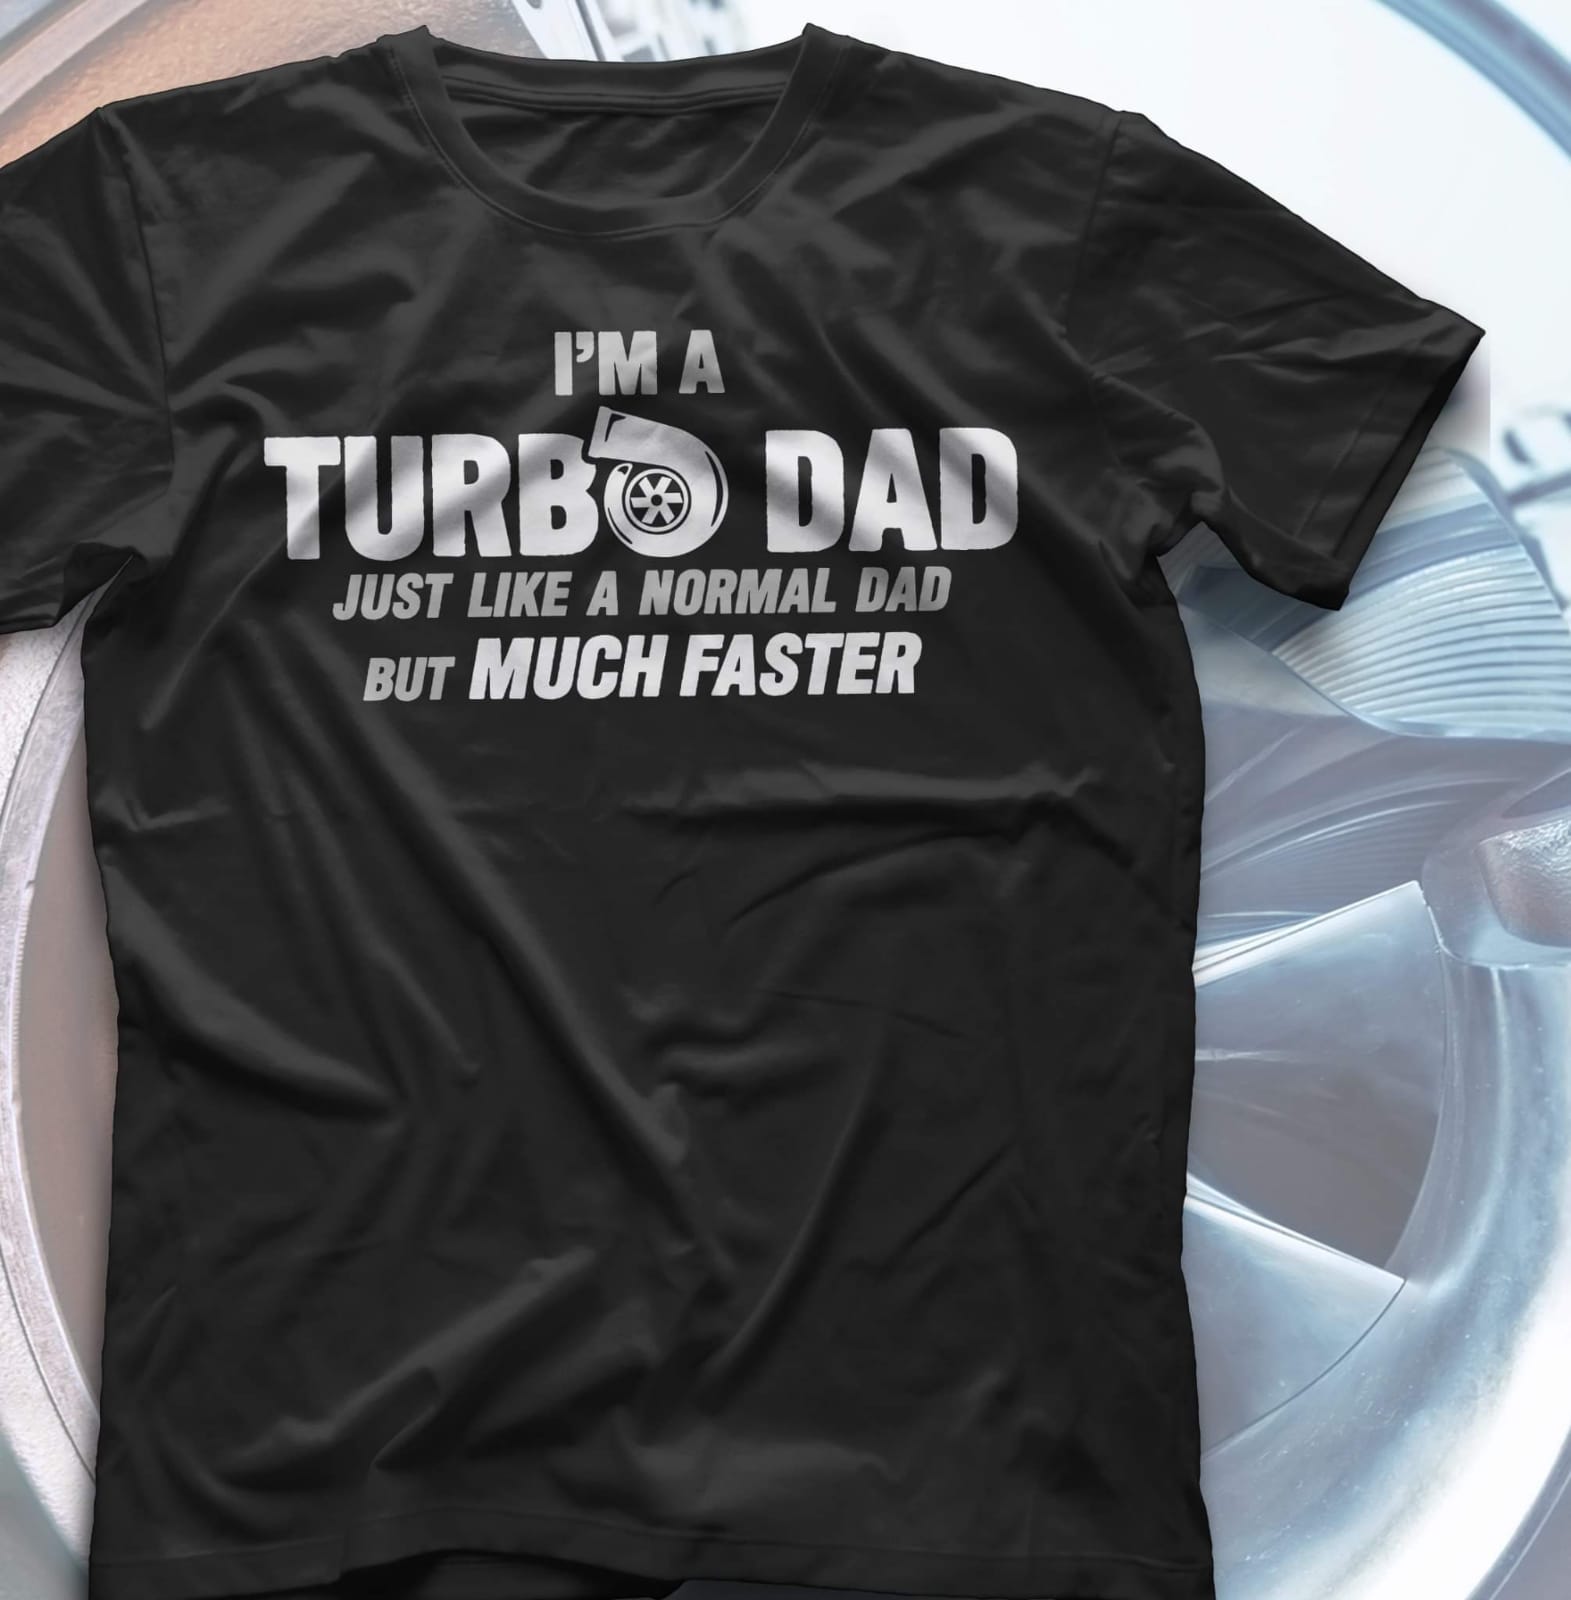 Just daddy. Футболка турбо. Футболки Turbobandit. Футболка турбо улитка. Just dad.